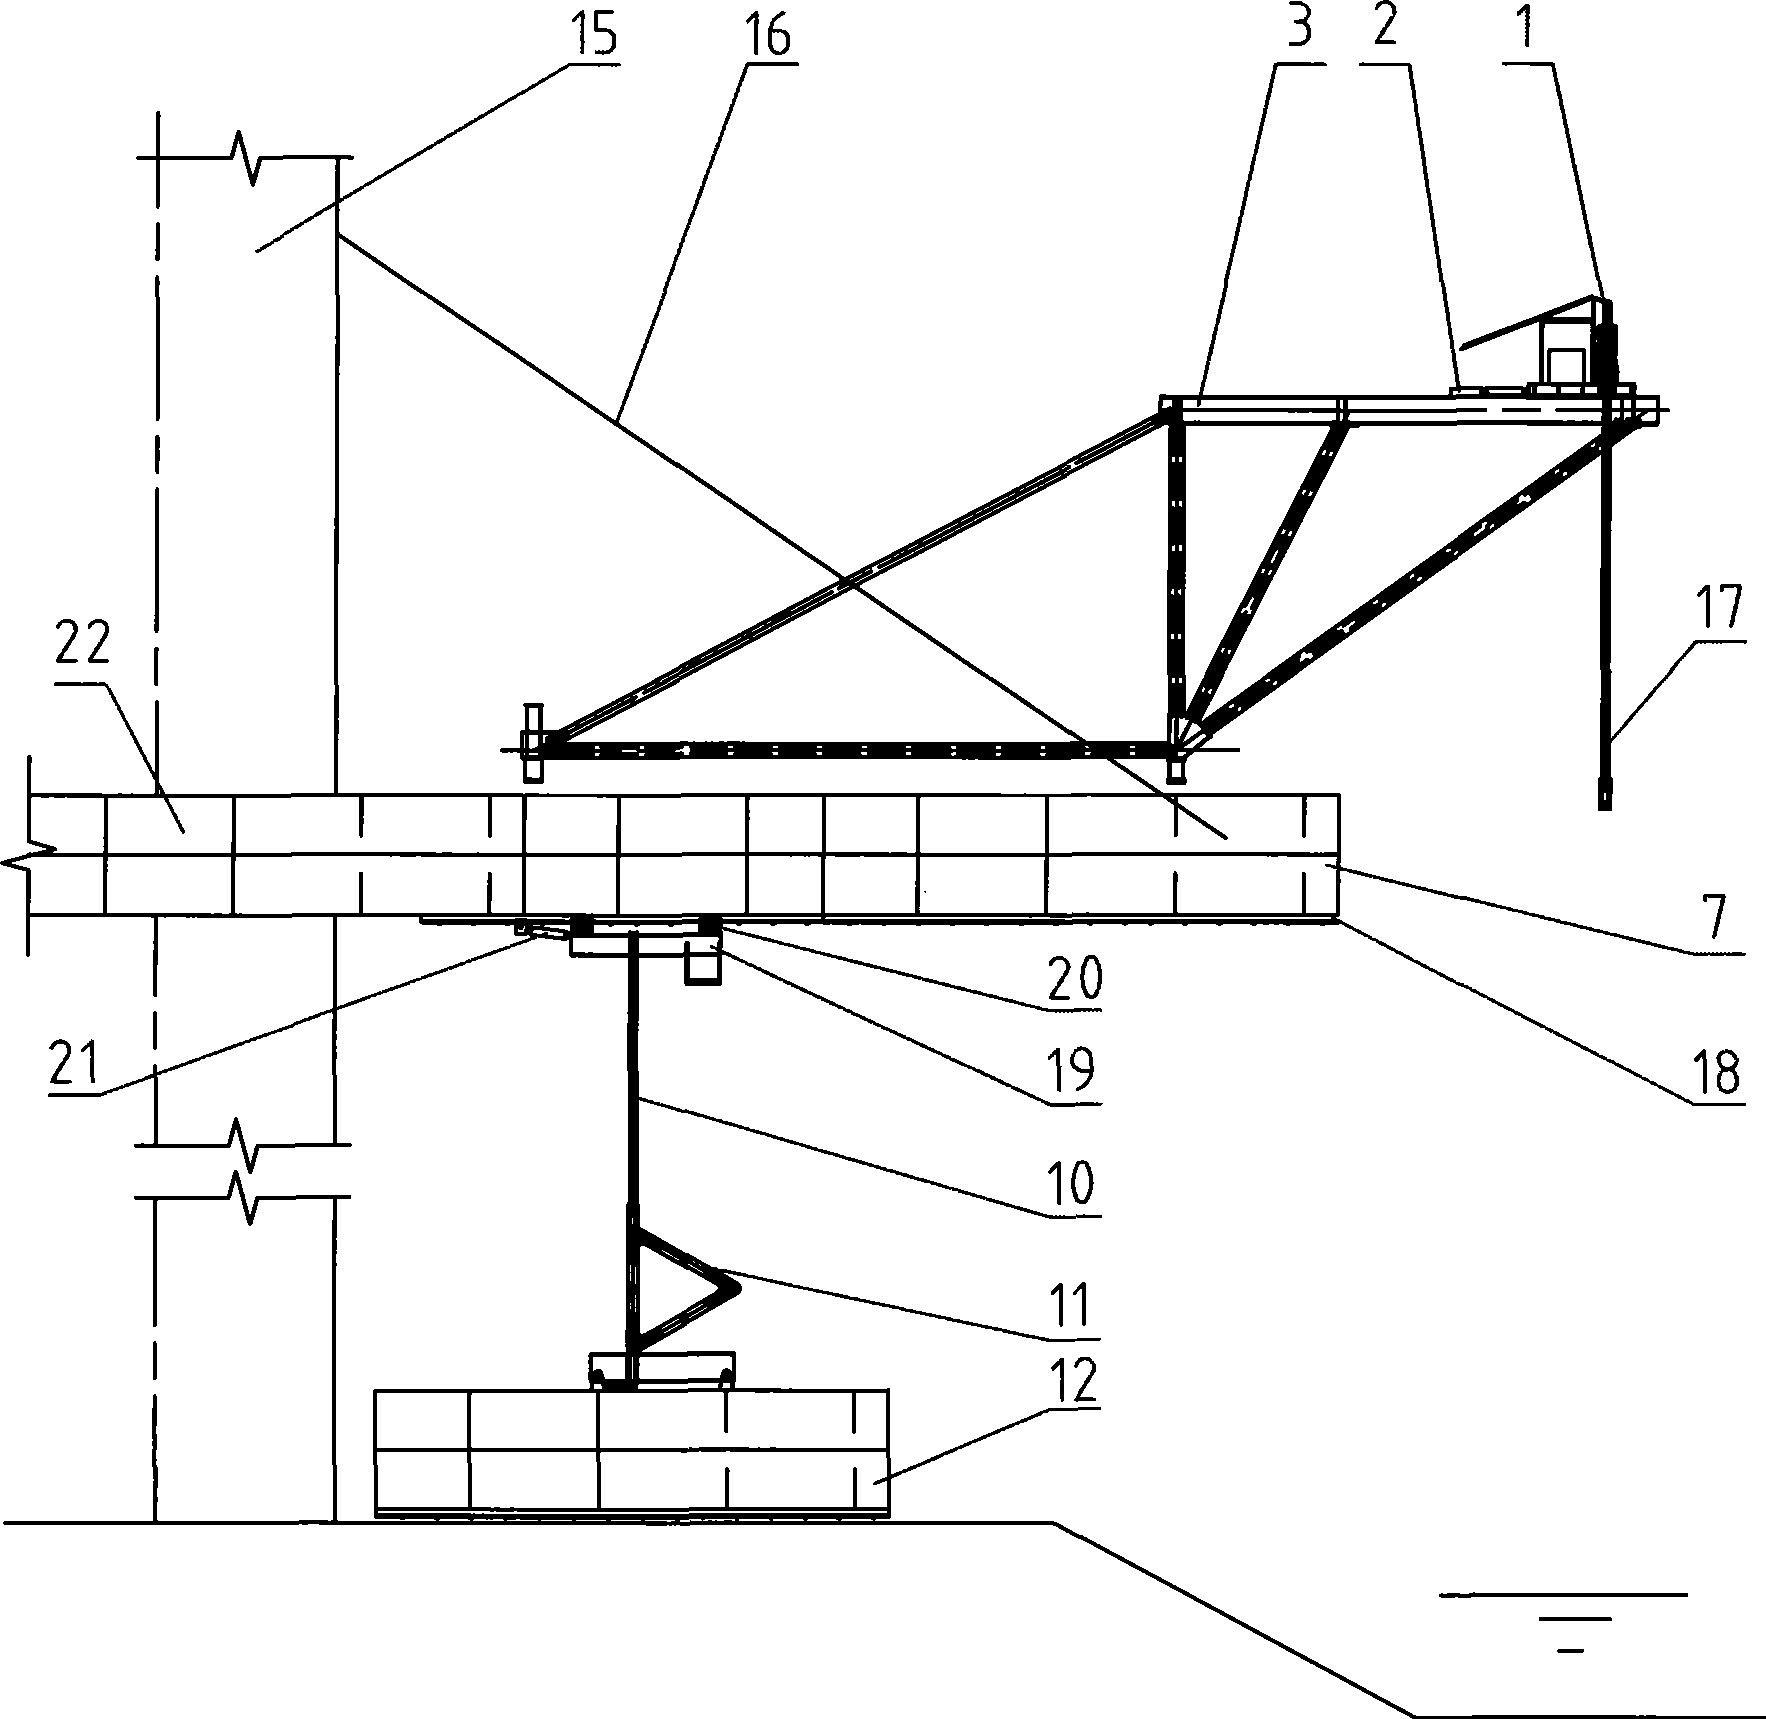 Construction methods of hanging beam and assembling cantilever in the bottom of steel case beam